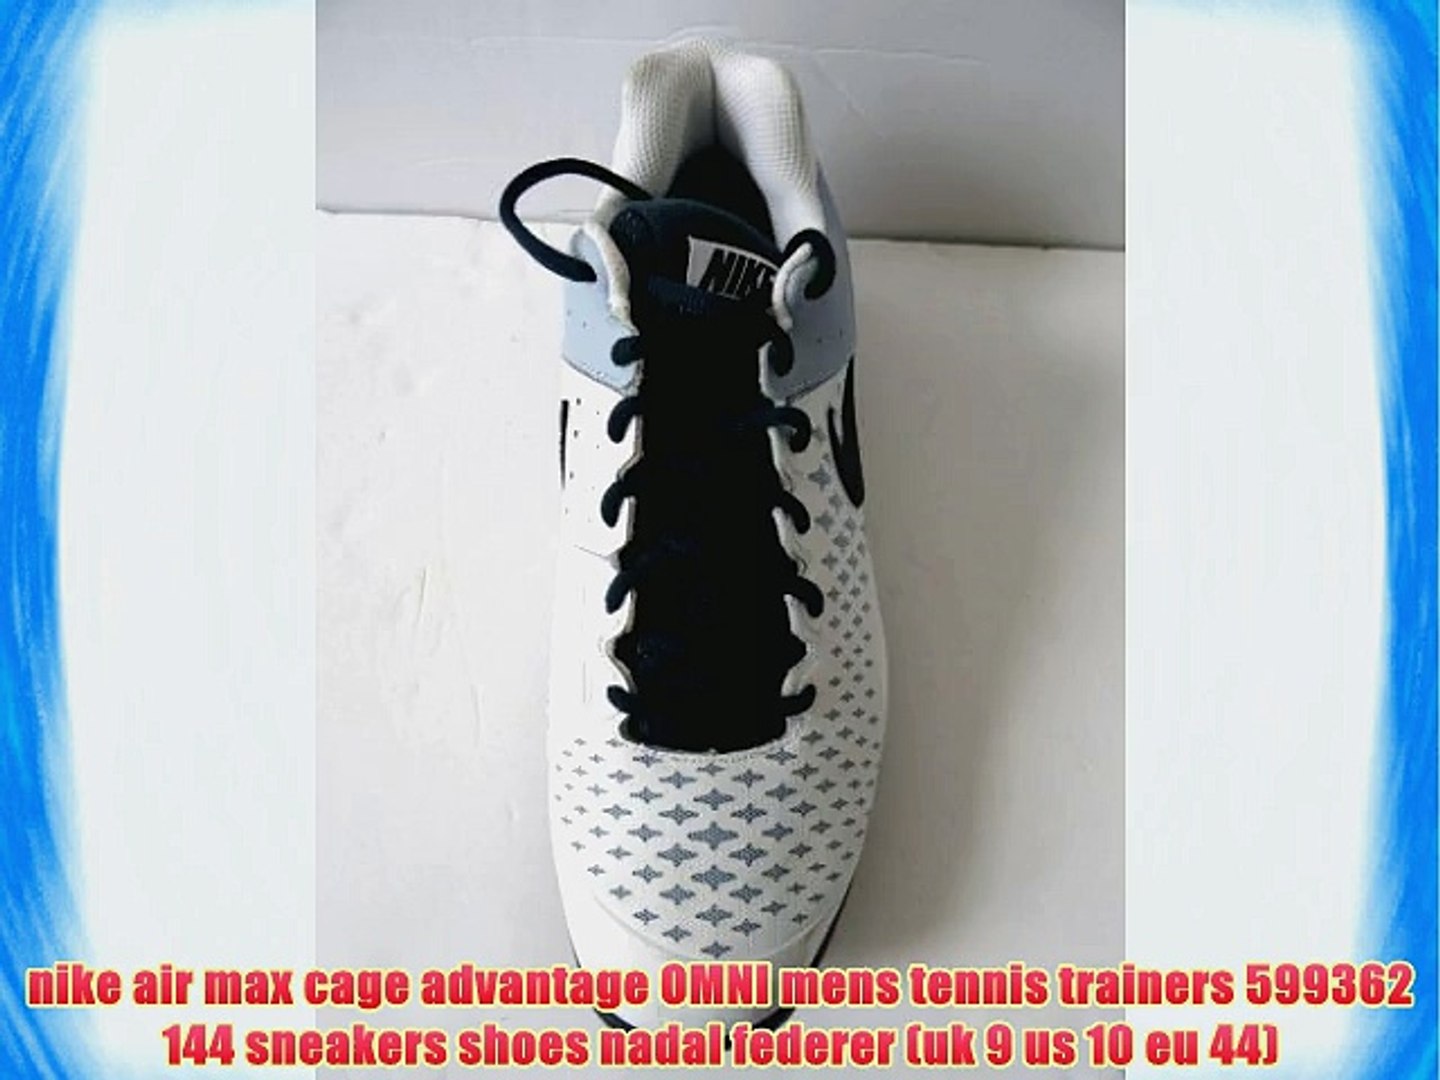 nike air max cage advantage OMNI mens tennis trainers 599362 144 sneakers  shoes nadal federer - video Dailymotion